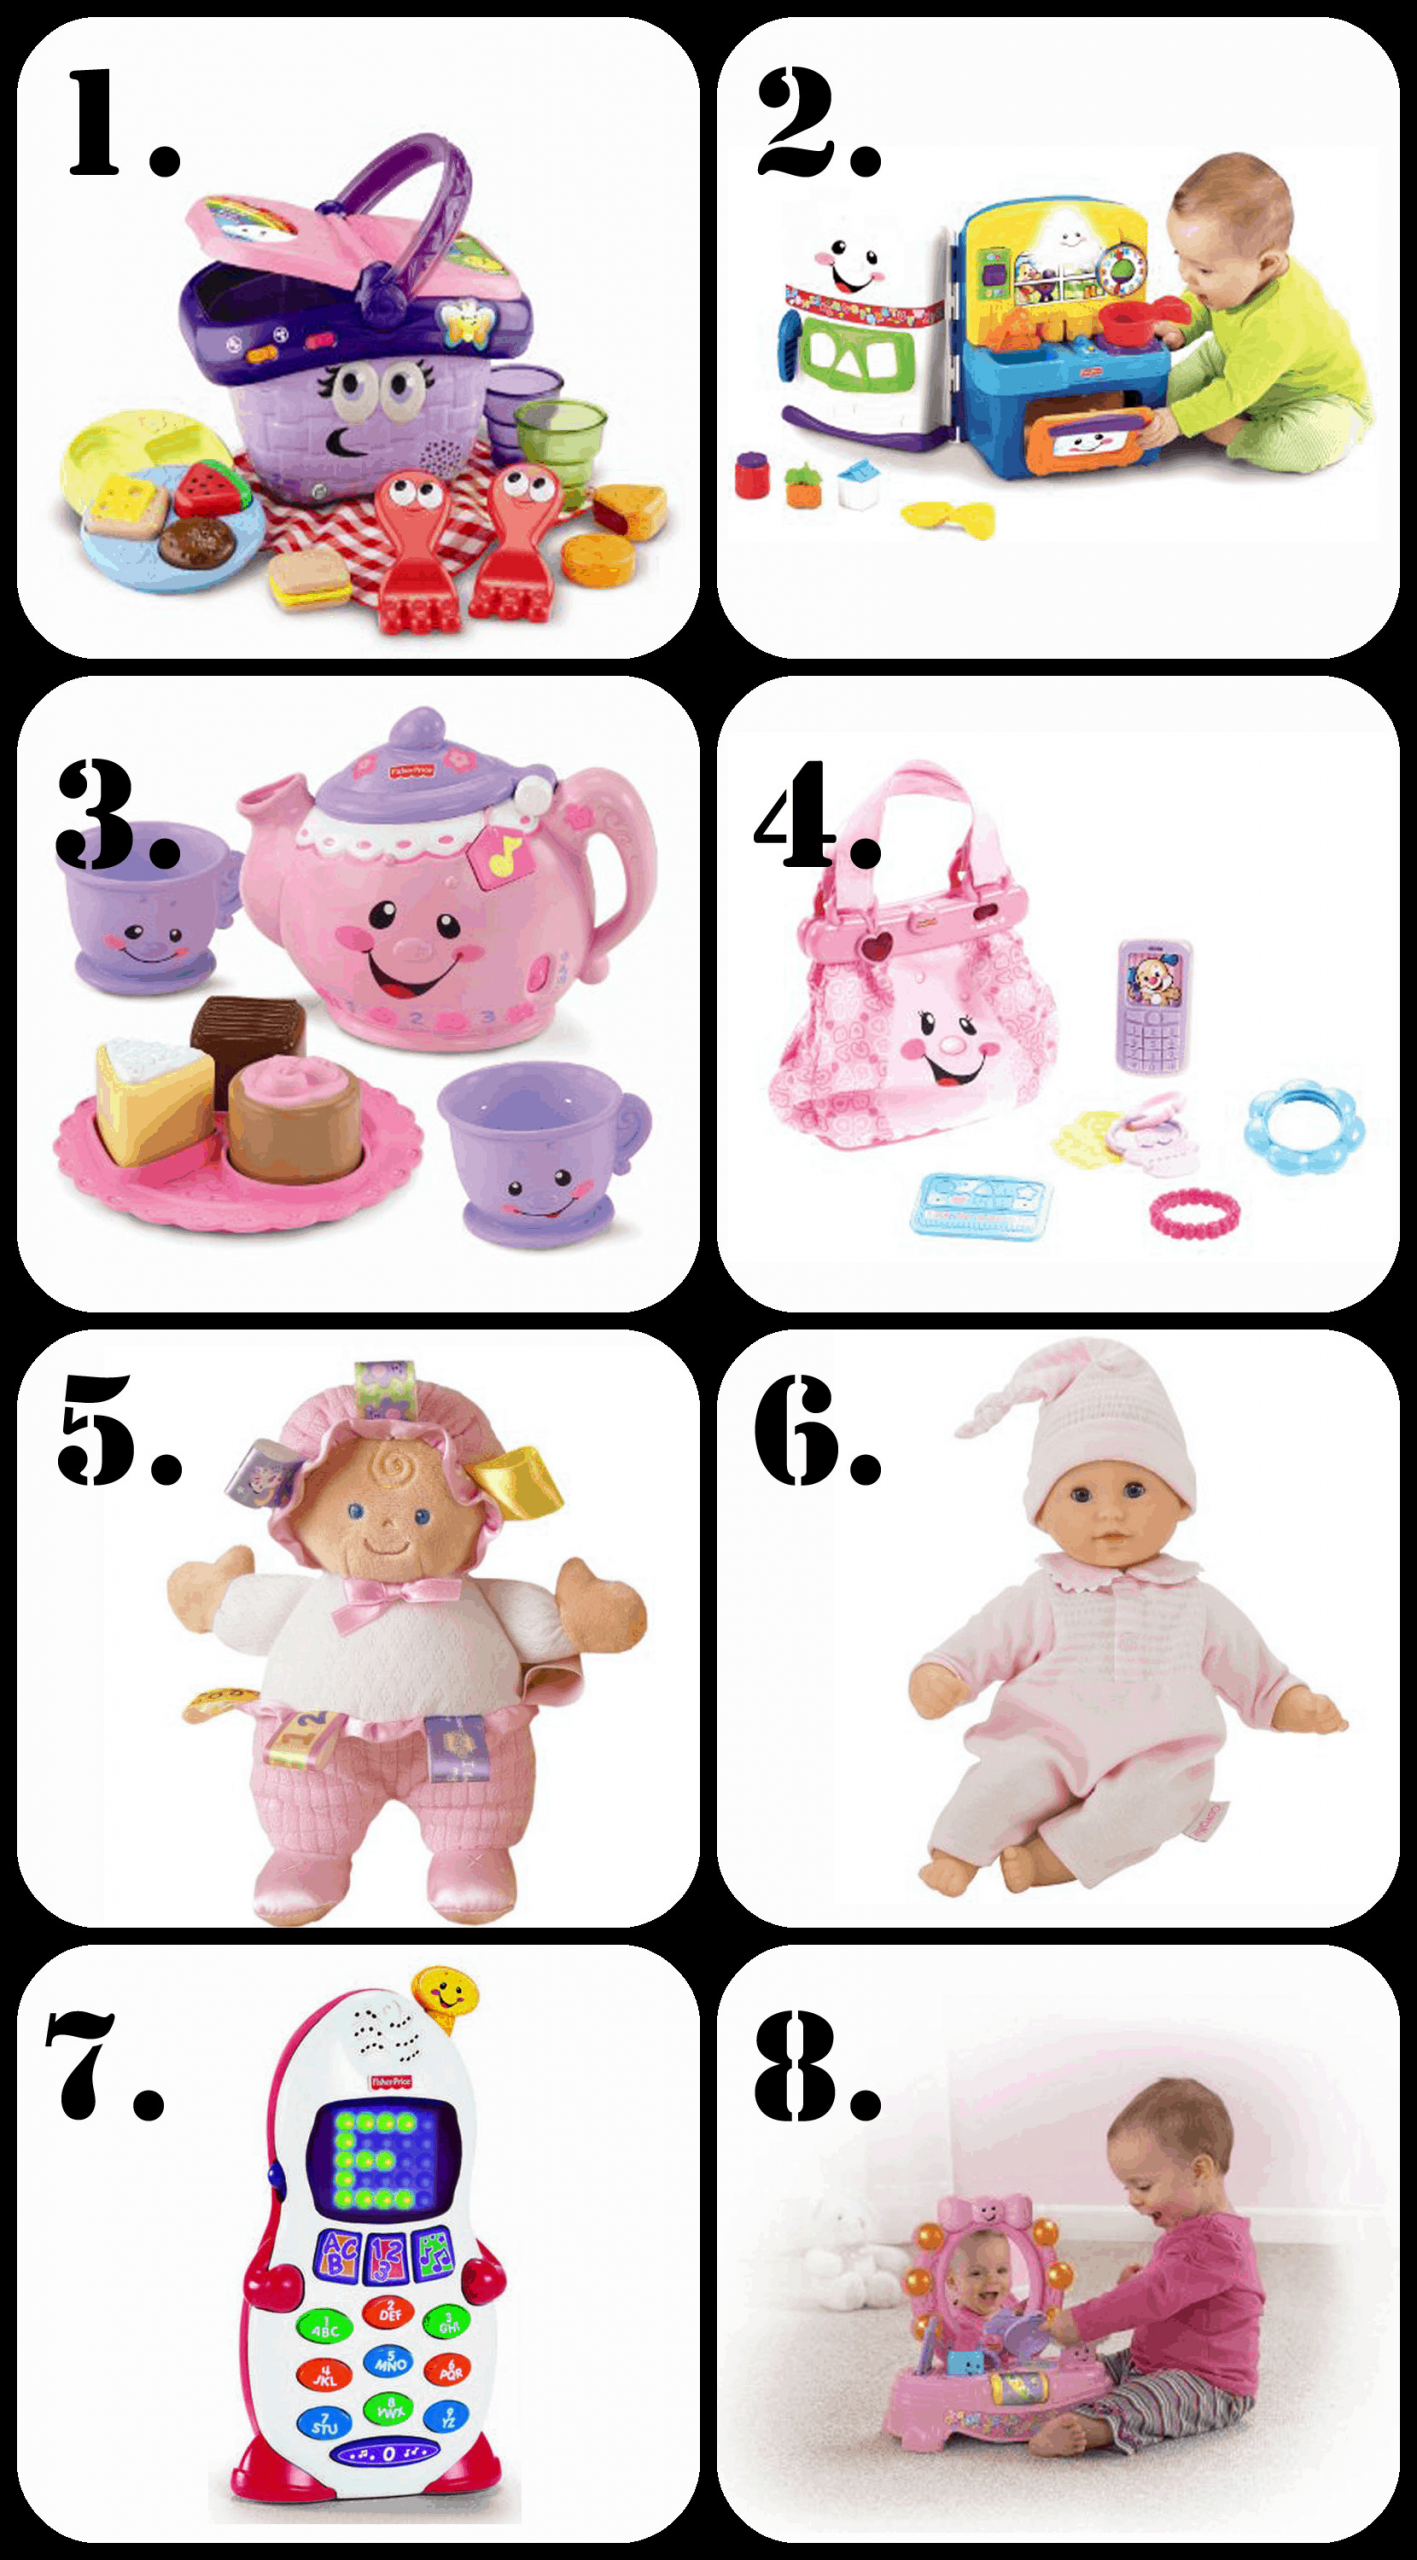 1 Year Old Baby Girl Gift Ideas
 The Ultimate List of Gift Ideas for a 1 Year Old Girl